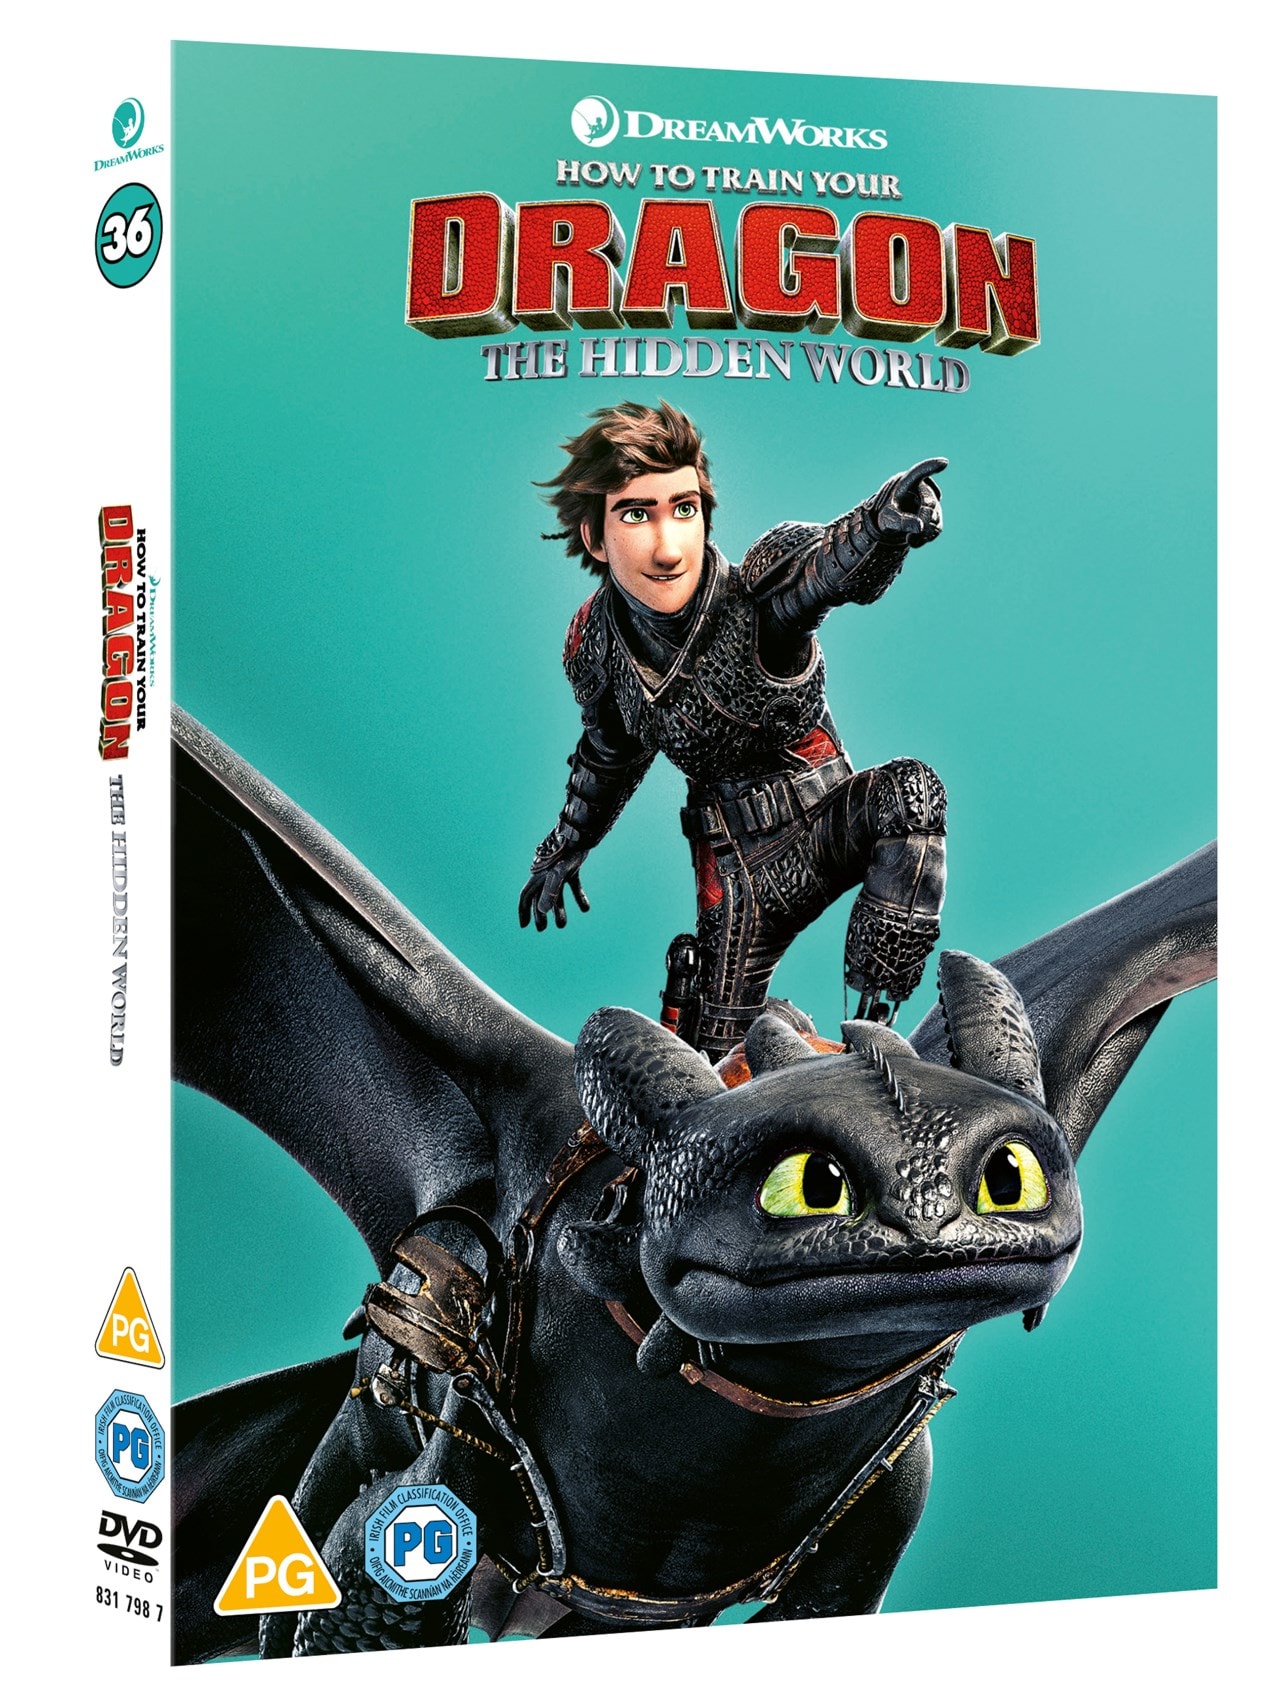 How to Train Your Dragon The Hidden World DVD Free